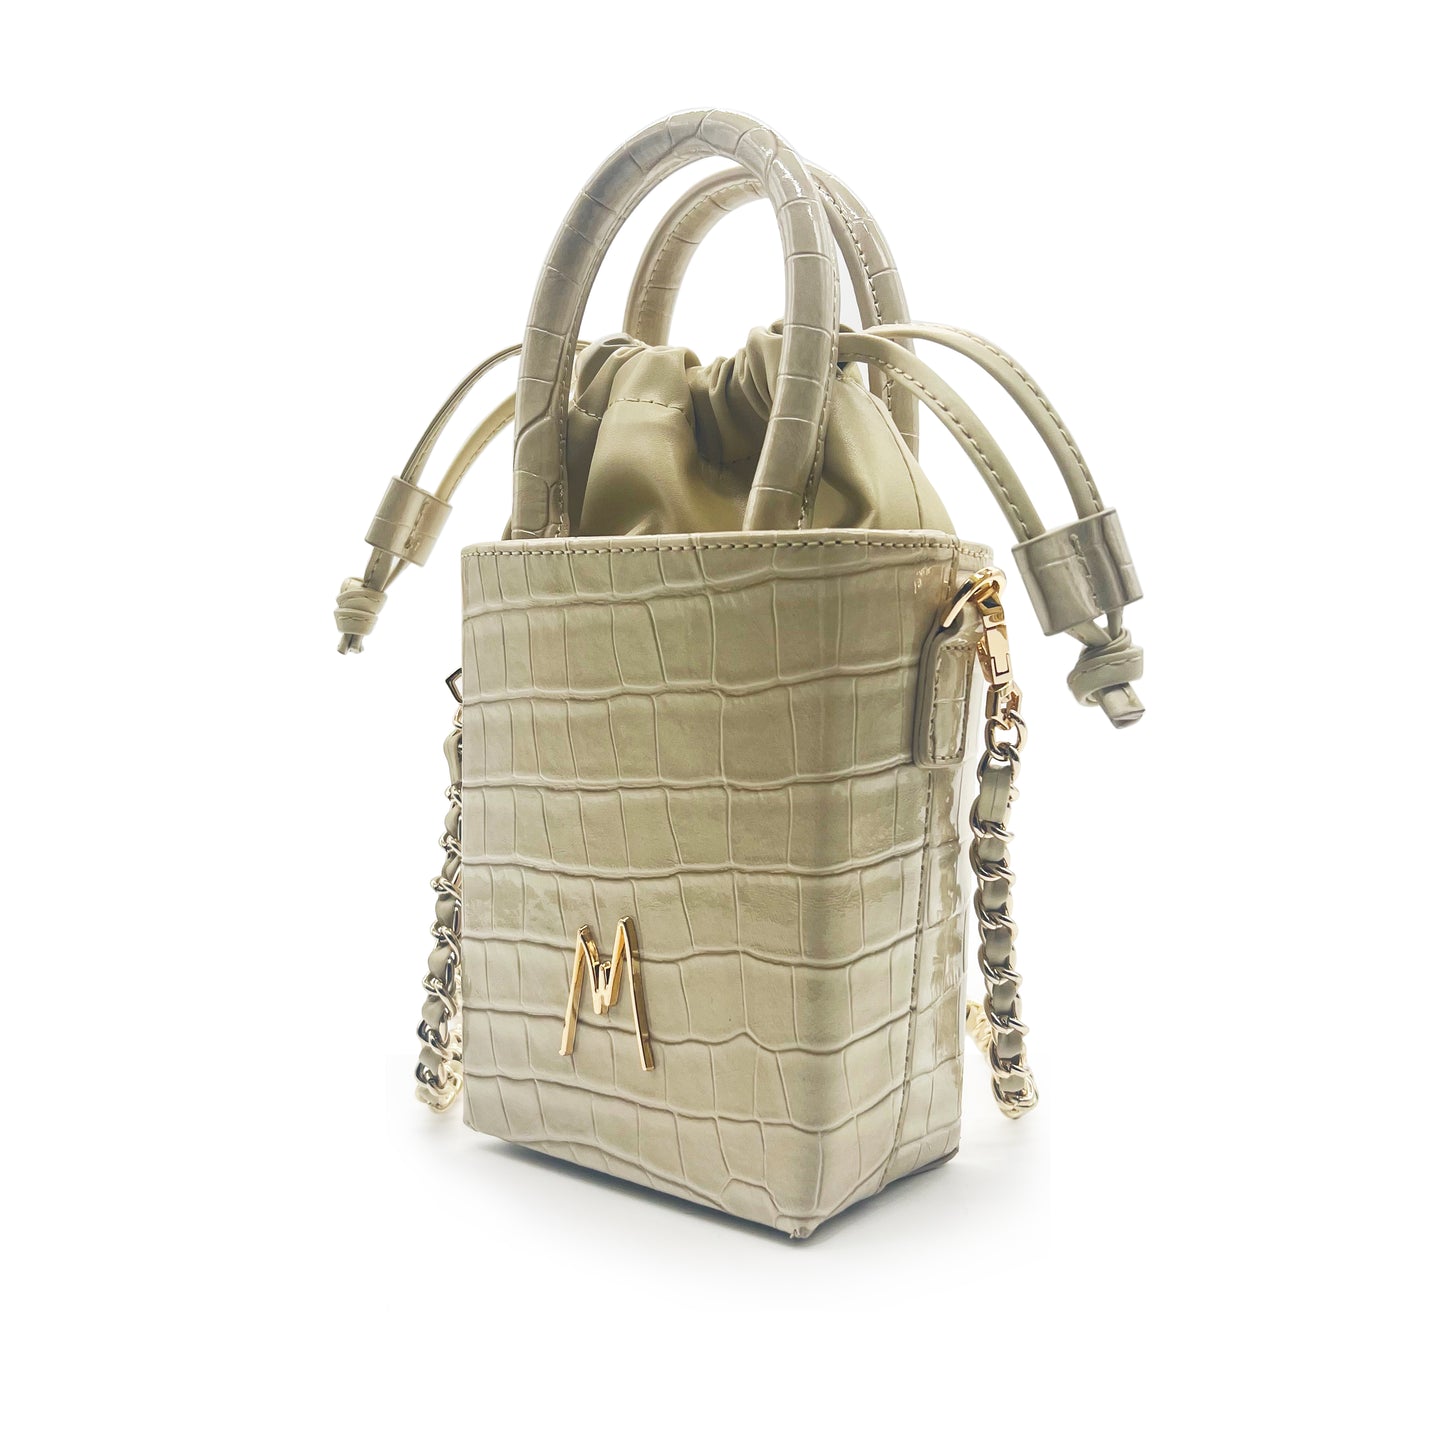 "SMALL LEATHER TOTE"  CROCODILE EMBOSSED - STONE